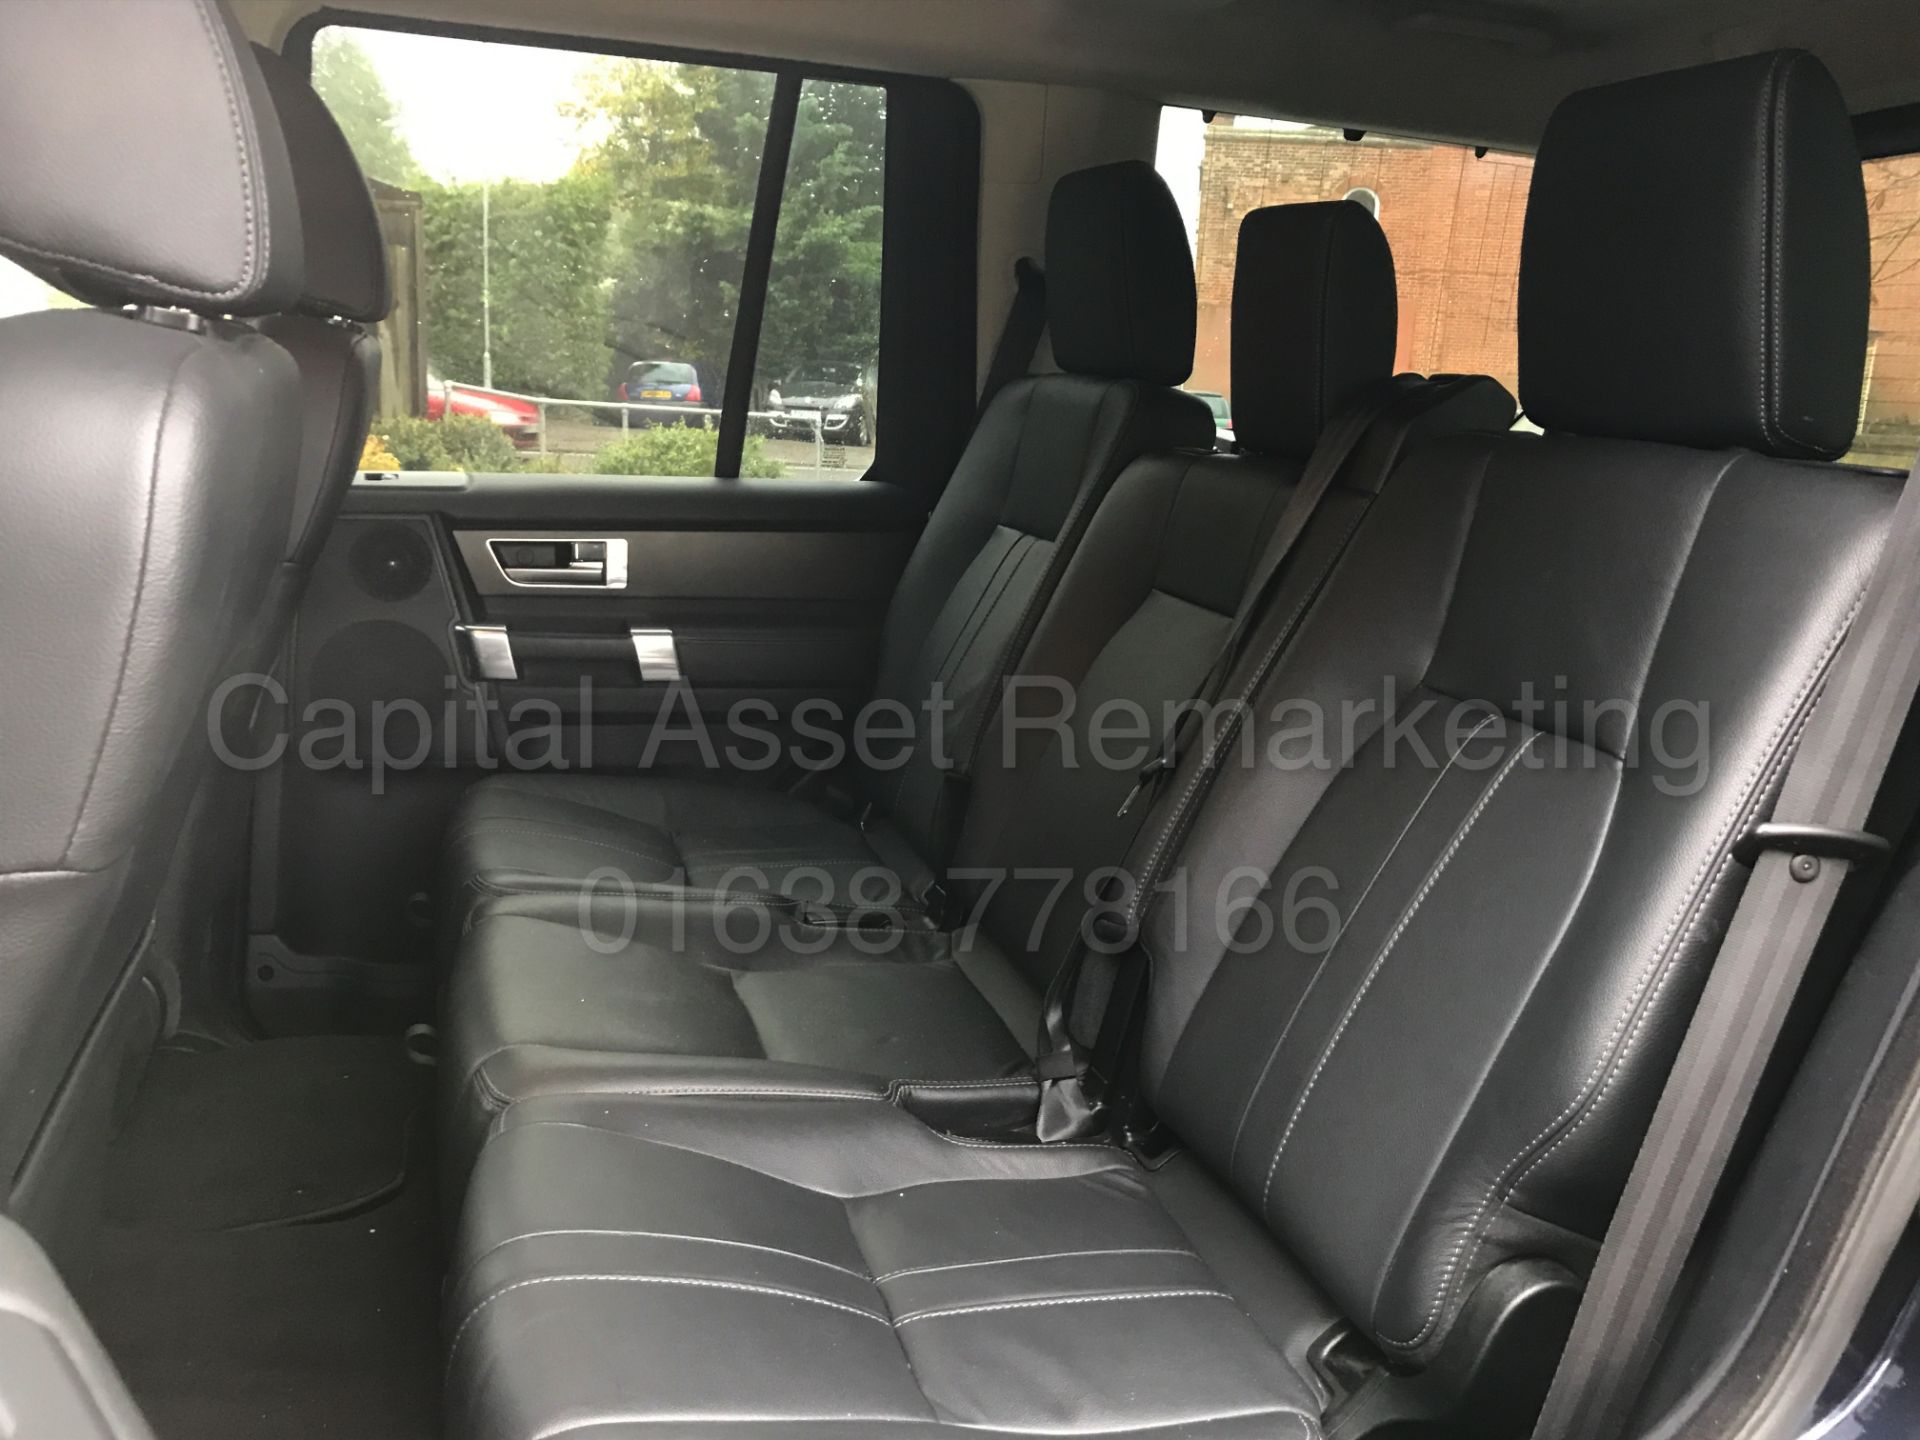 ON SALE LAND ROVER DISCOVERY 4 (2014) '3.0 SDV6 - 8 SPEED AUTO - LEATHER - SAT NAV -7 SEATER'1 OWNER - Image 17 of 41